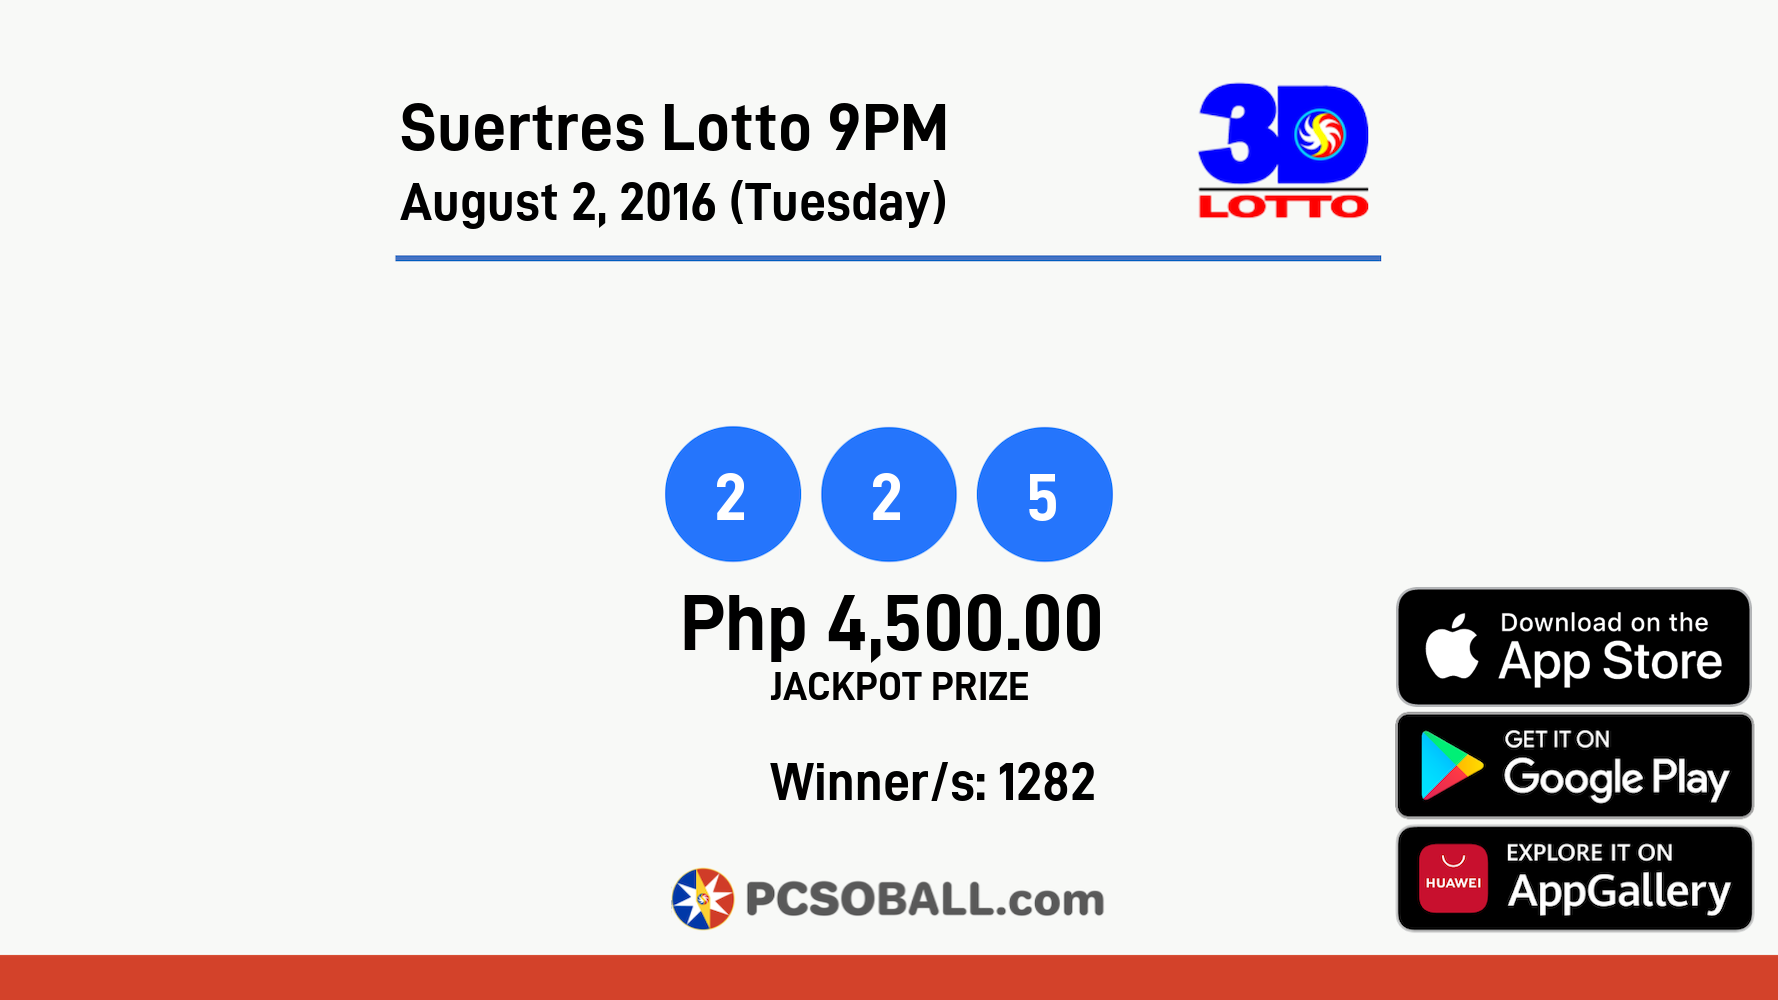 Suertres Lotto 9PM August 2, 2016 (Tuesday) Result